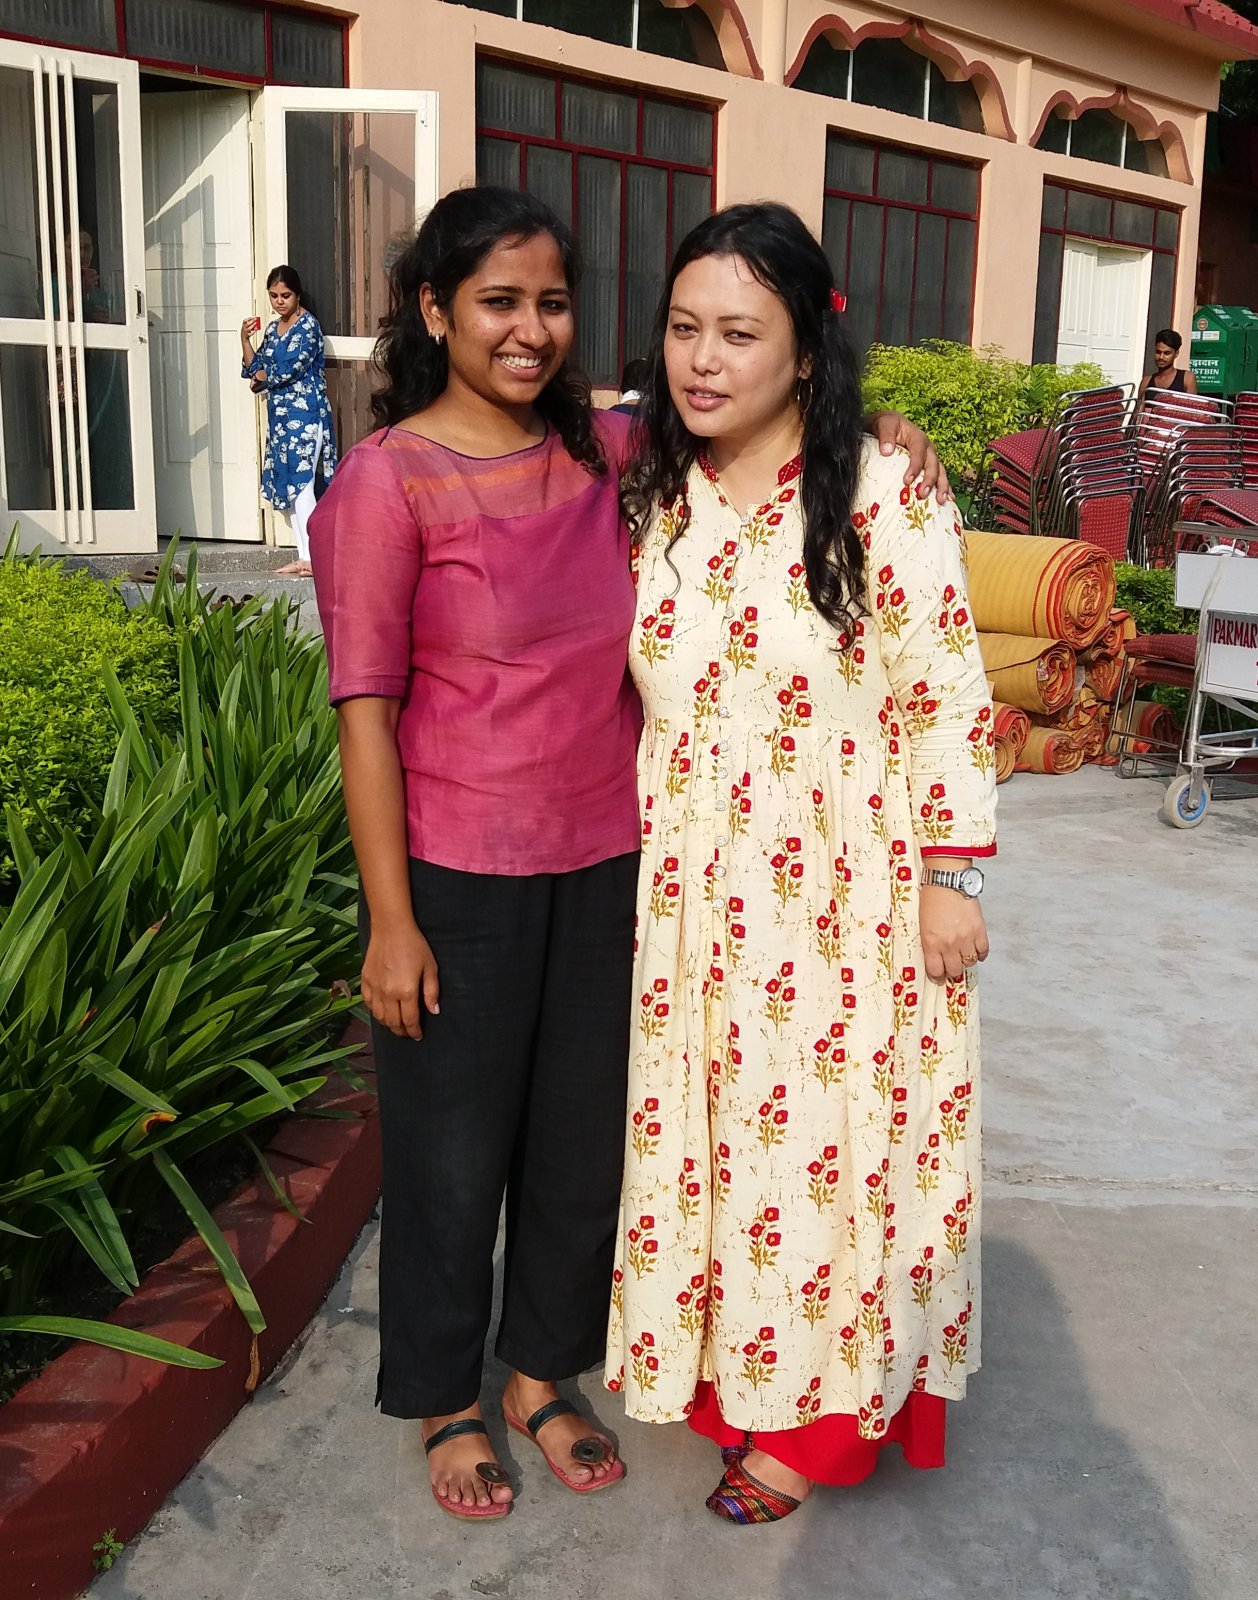 <p>With Satakshi Gawade, an environment journalist from Pune who runs her own media company. Satakshi is now a World Pulse community member and evn won the Story Awards.</p>